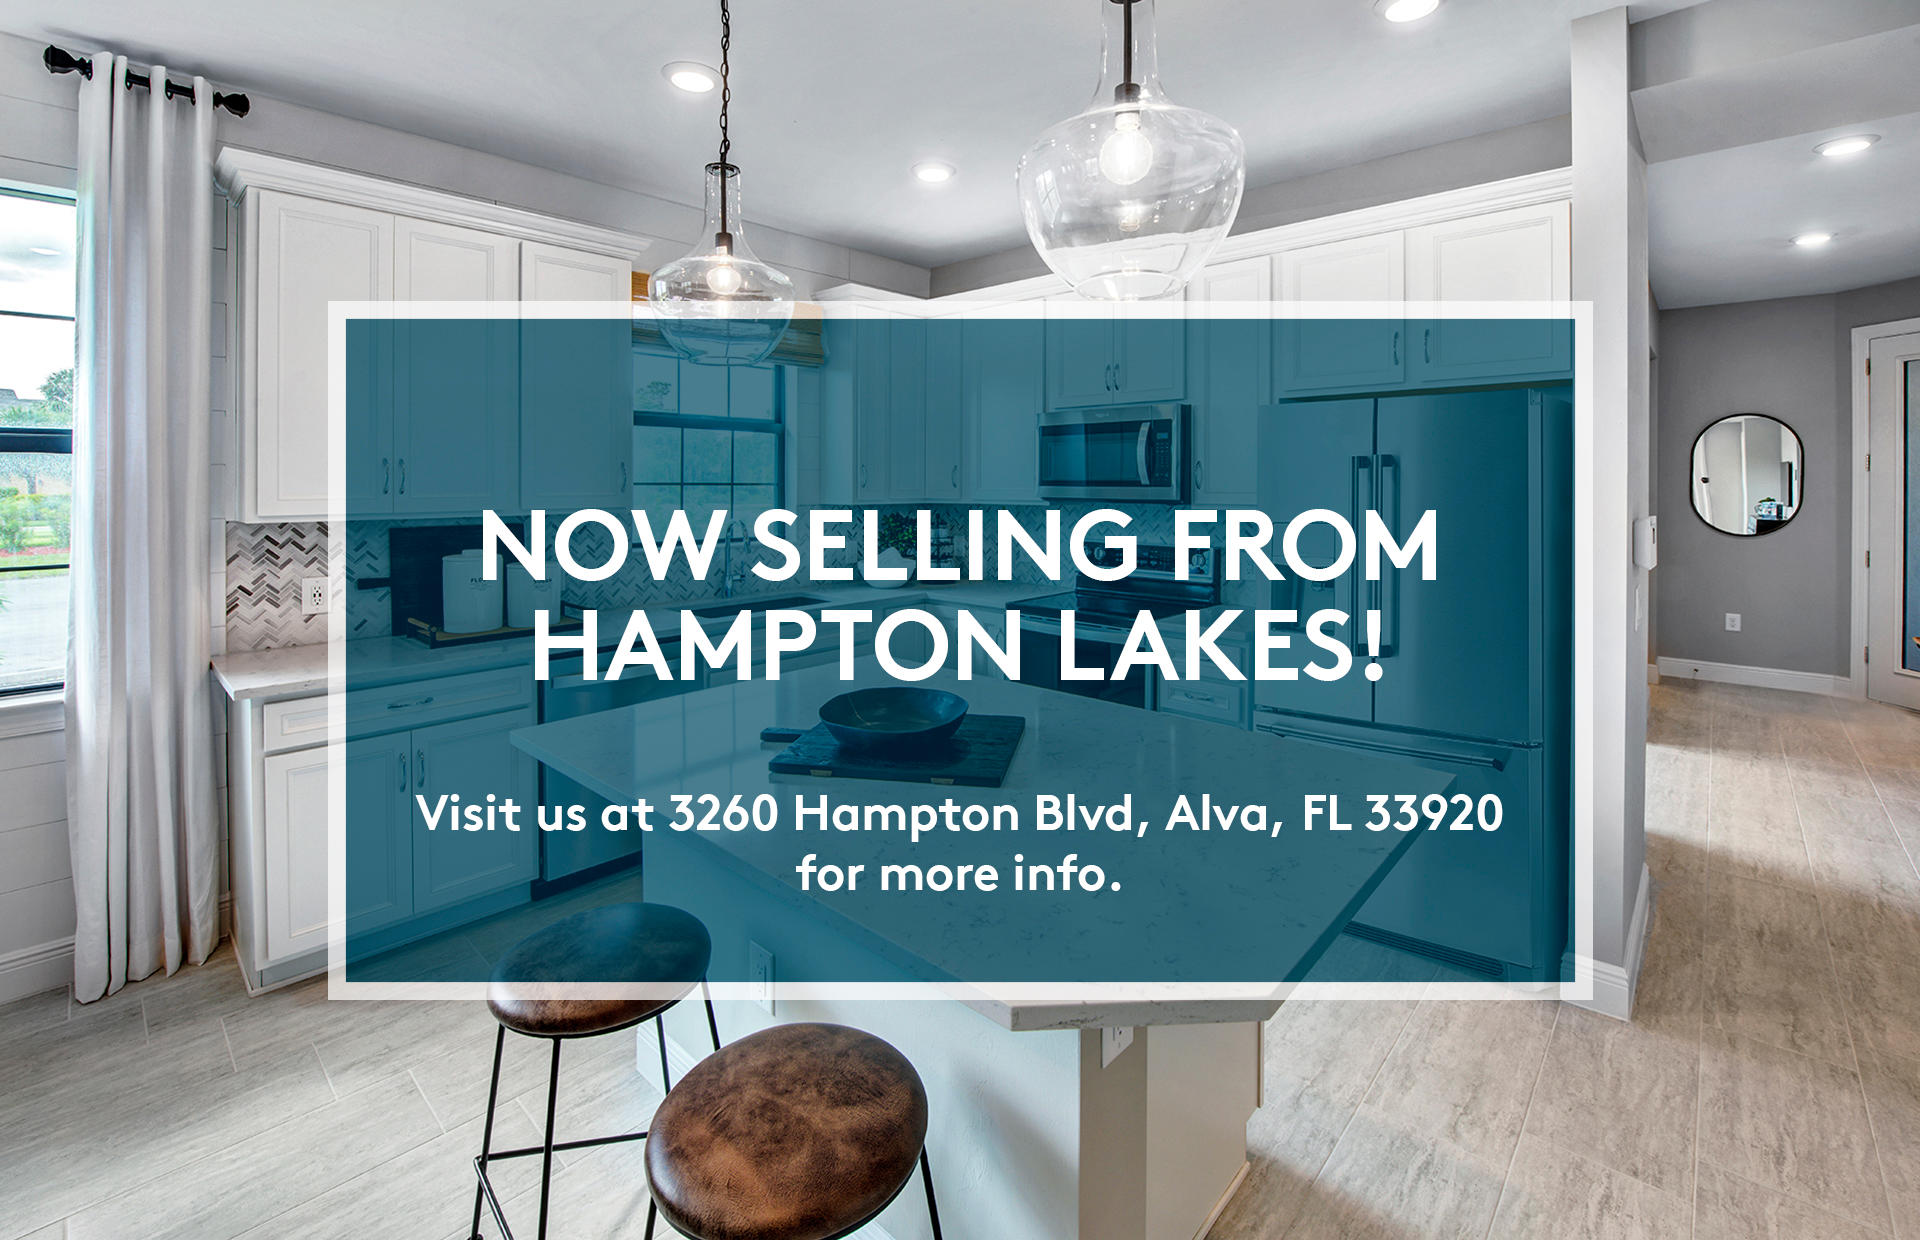 Our Sales Center is temporarily closed! Please visit Hampton Lakes for more information on new home opportunities at River Hall